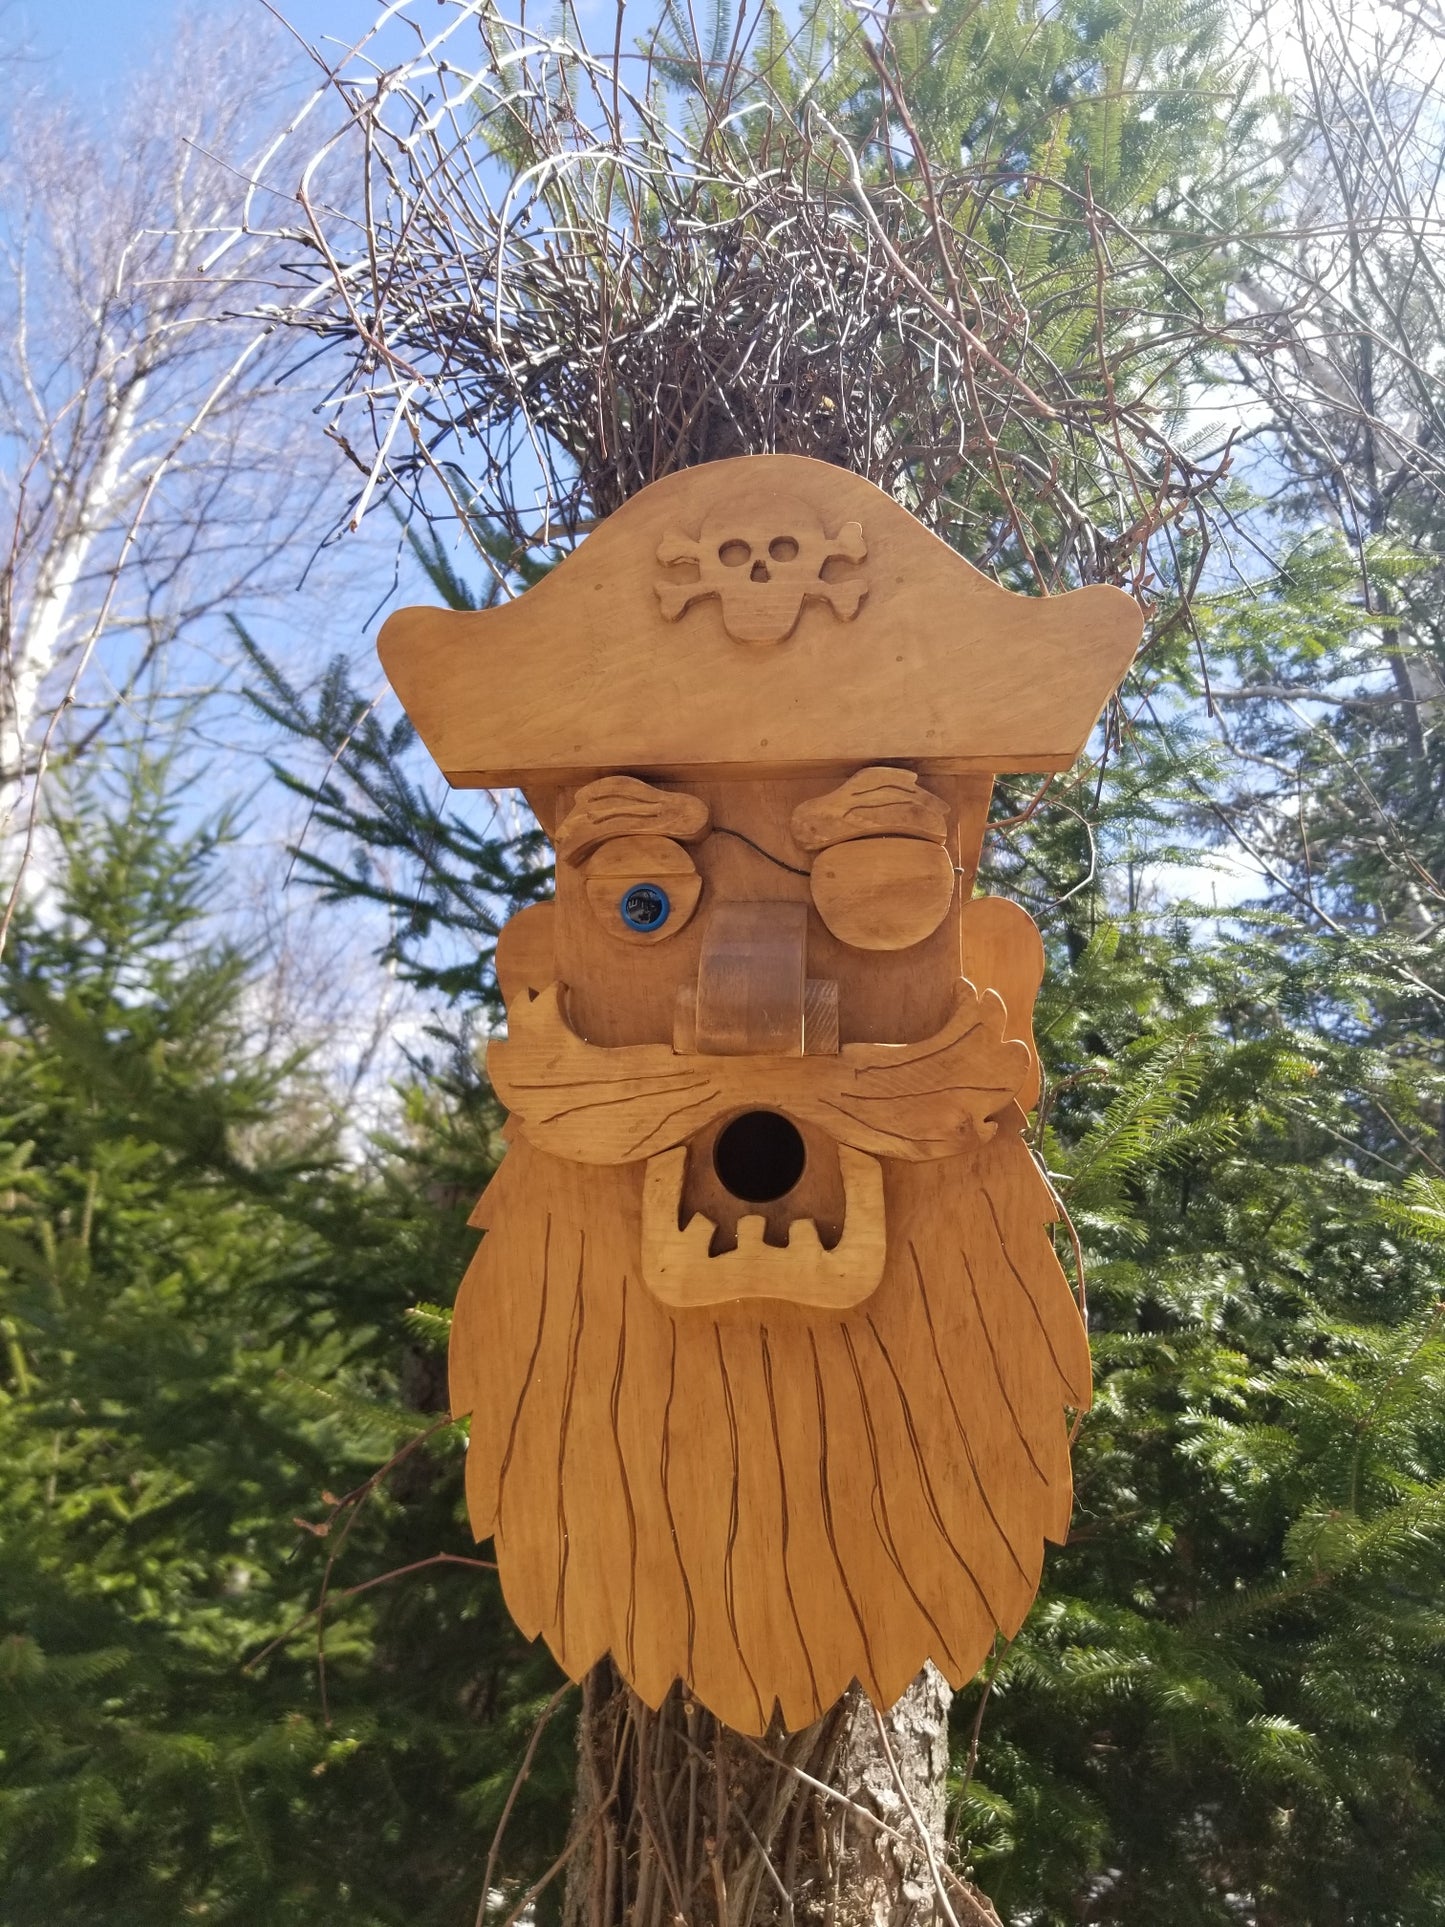 buy a wooden pirate statue at auction